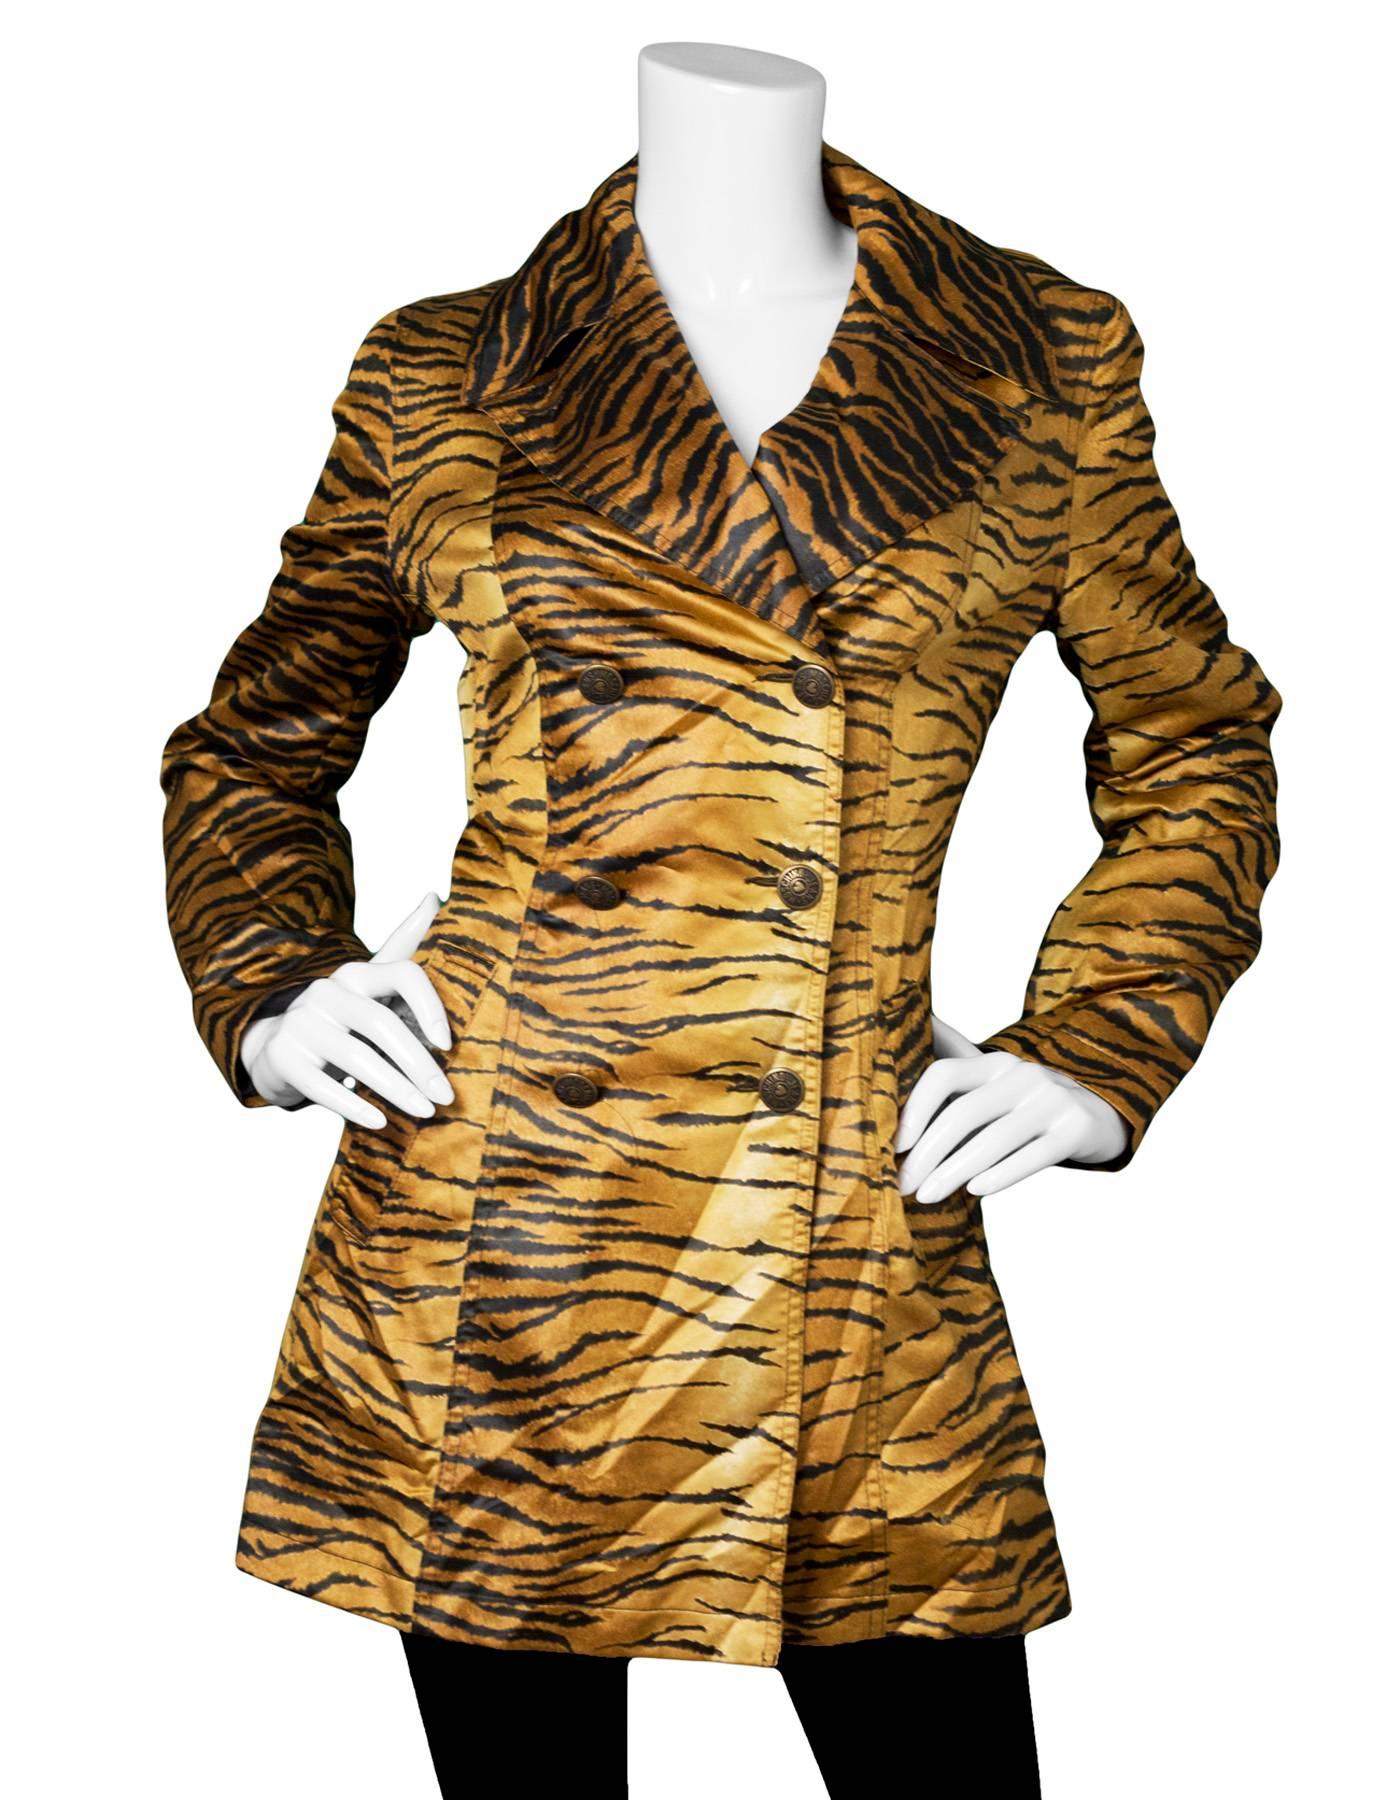 Moschino Jeans Tiger Print Satin Trench Coat 
Features optional waist belt

Made In: Italy
Color: Orange and black
Composition: 100% polyester
Lining: Black, 100% polyester
Closure/Opening: Button down closure
Exterior Pockets: Two hip